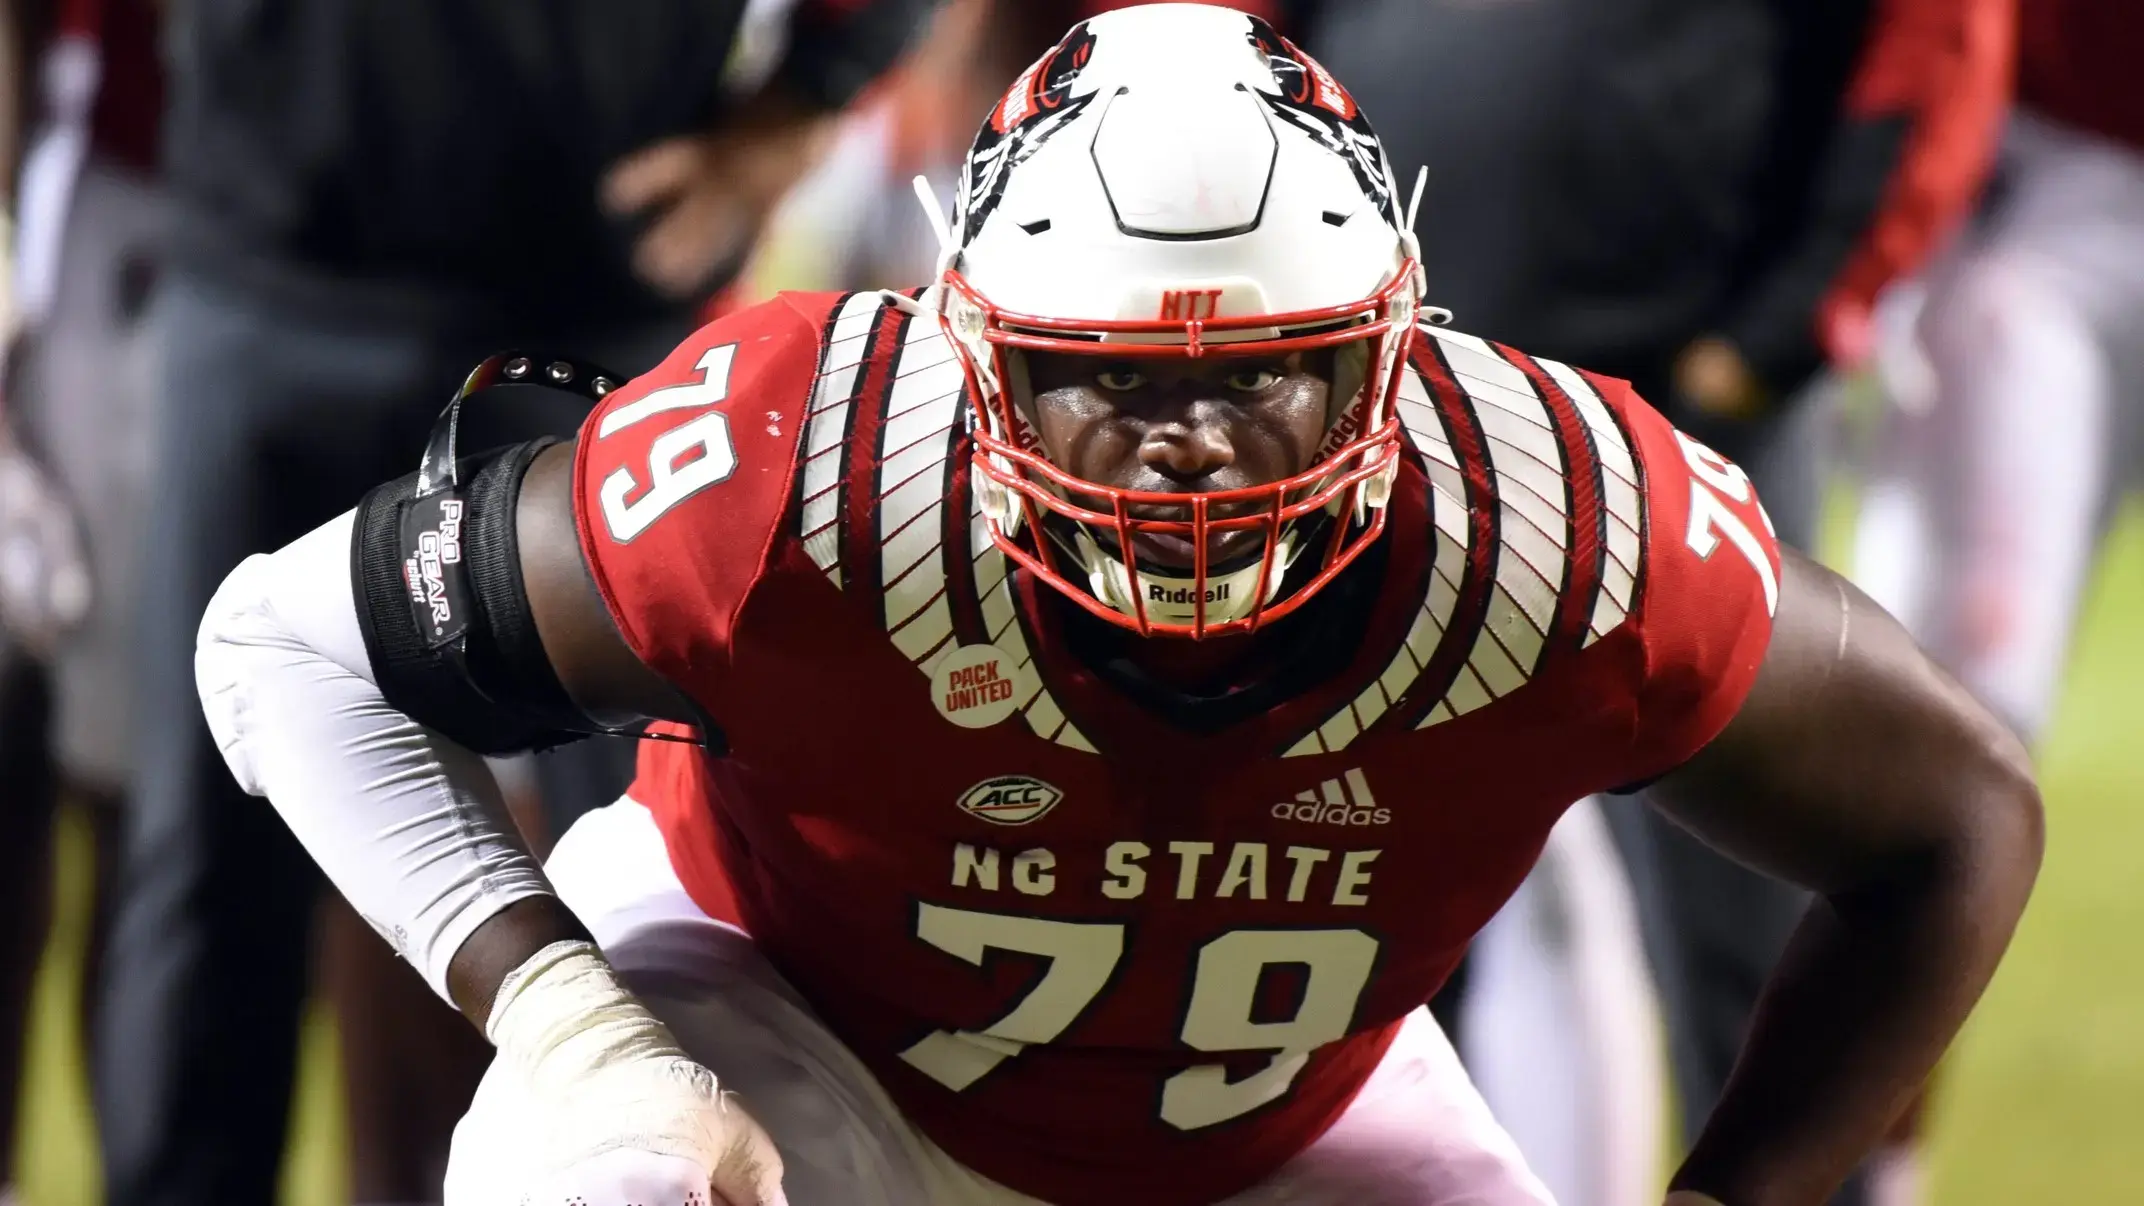 Oct 30, 2021; Raleigh, North Carolina, USA; North Carolina State Wolfpack tackle Ikem Ekwonu (79) warms up prior to a game against the Louisville Cardinals at Carter-Finley Stadium. / Rob Kinnan-USA TODAY Sports